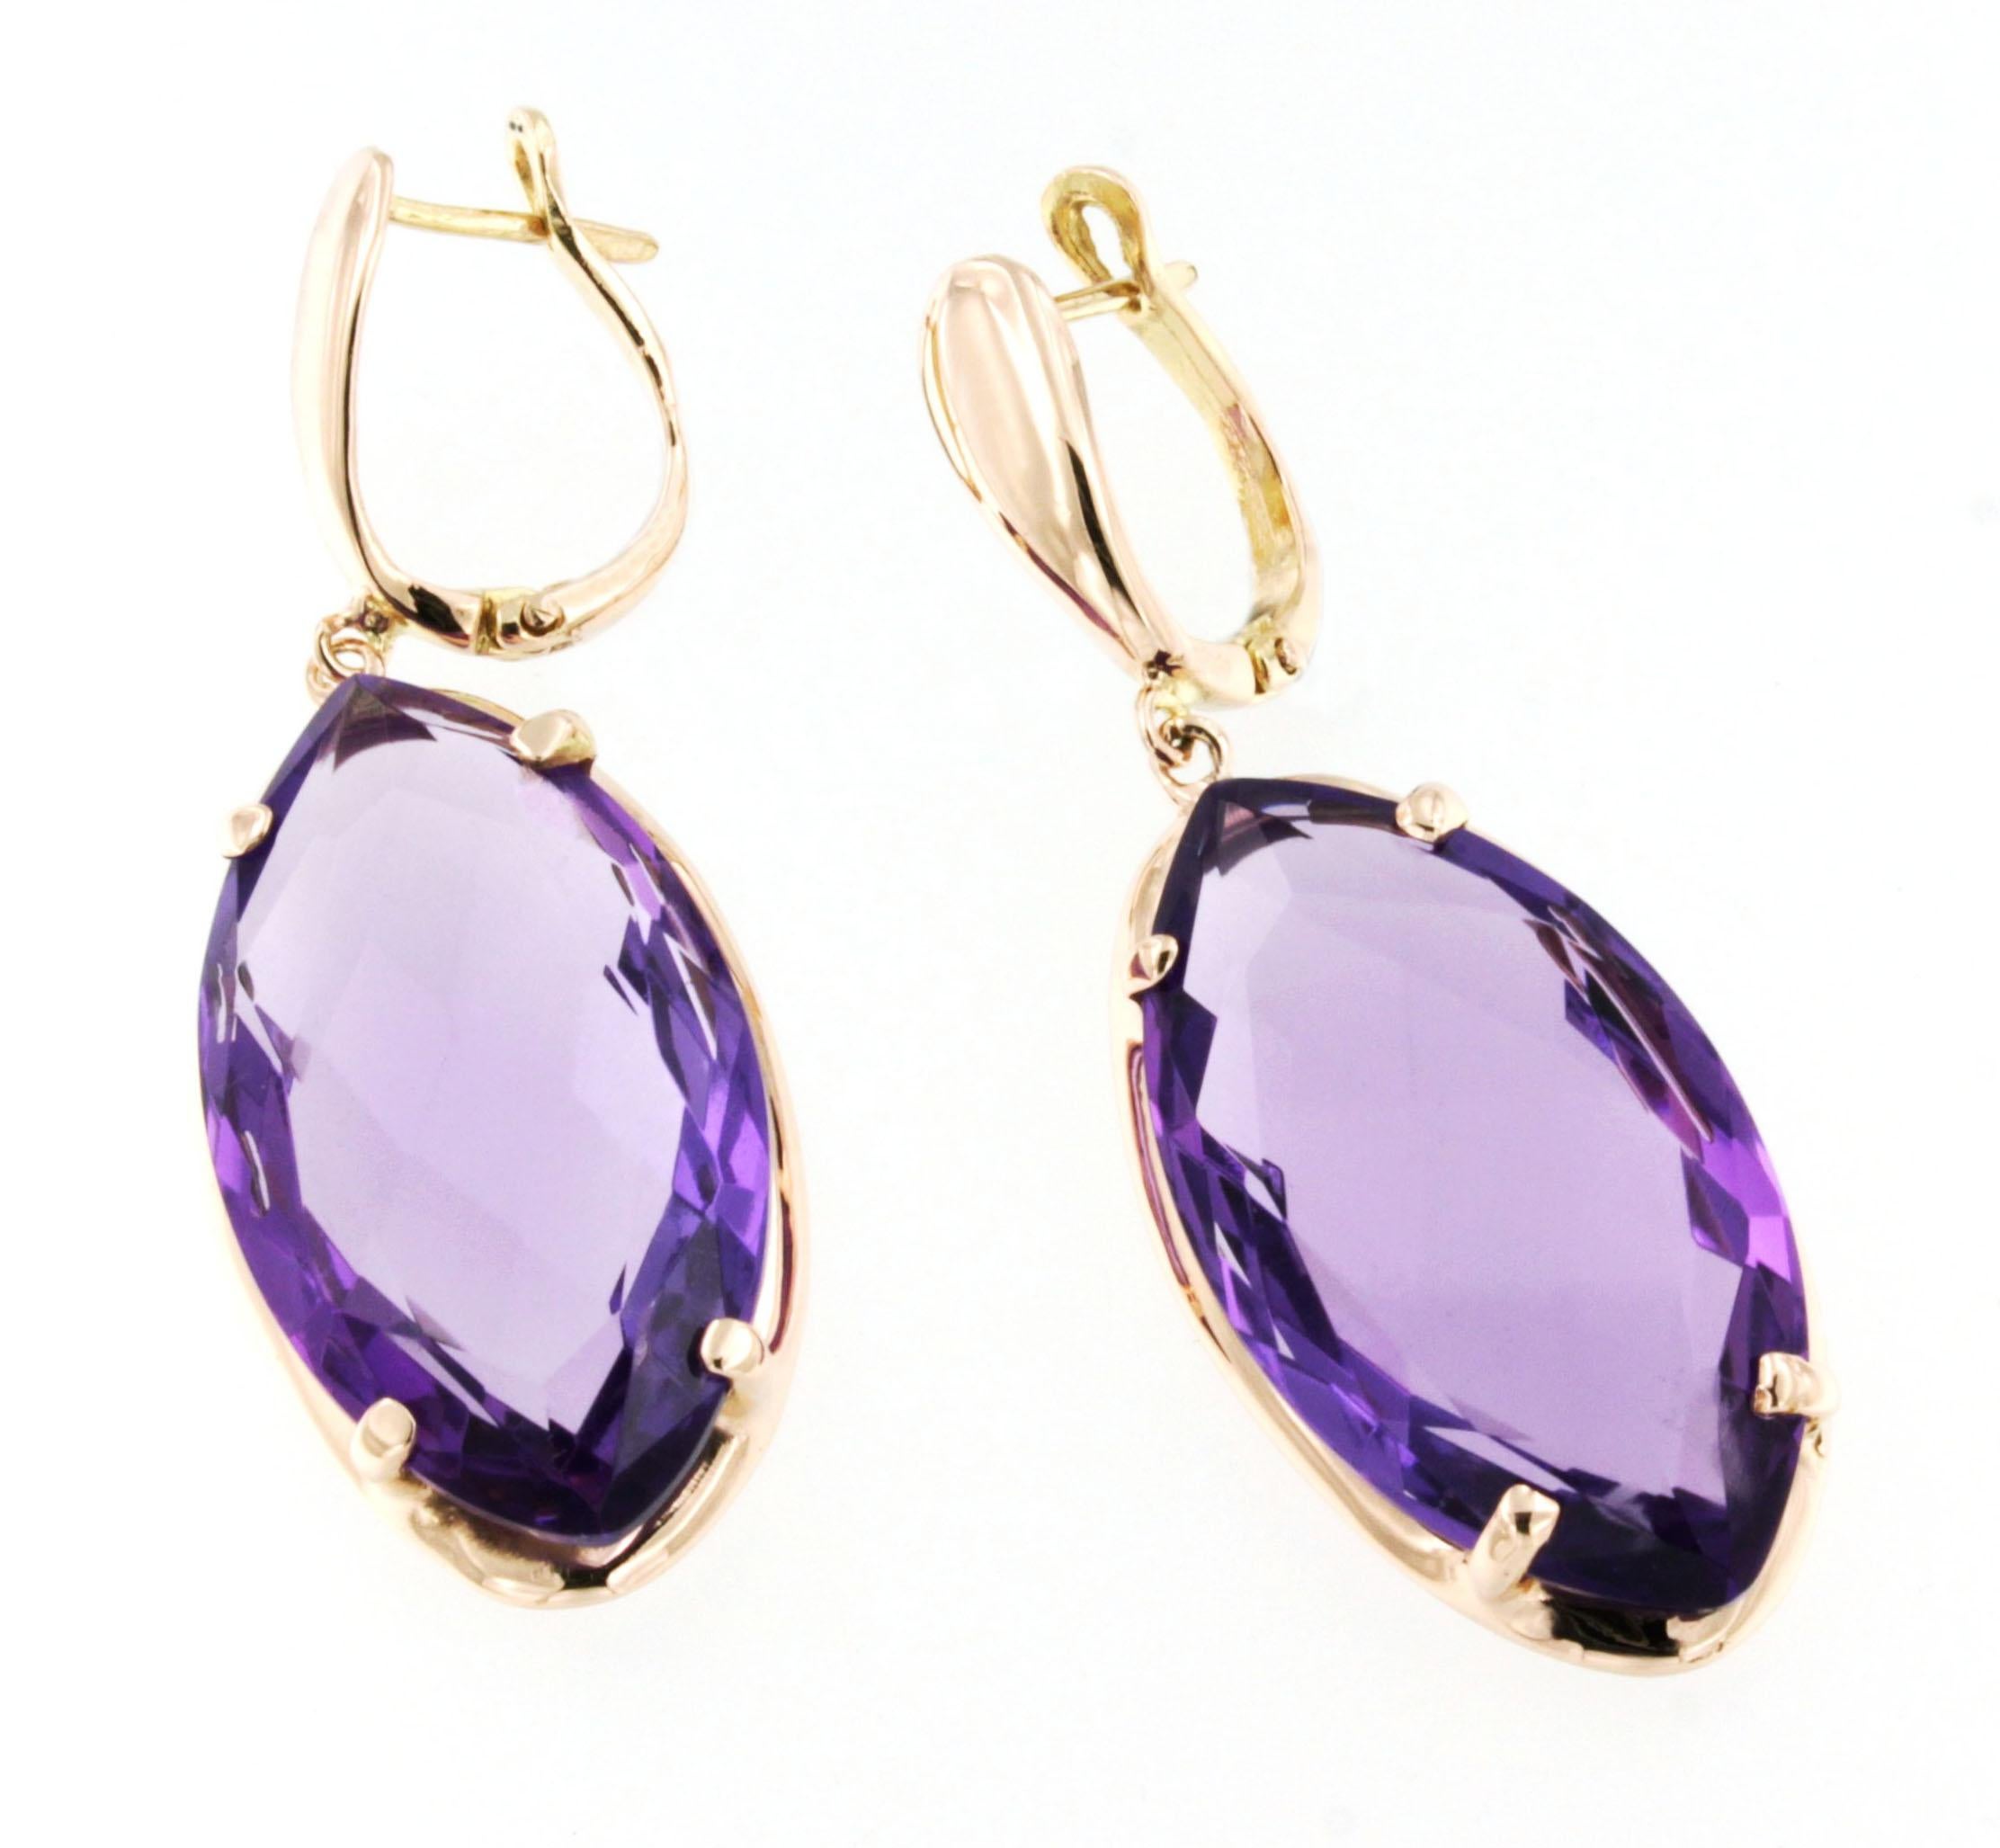 Earrings in rose gold 14 Karat with hydrothermal Amethyst (marquise cut, size: 16x28 mm)

All Stanoppi Jewelry is new and has never been previously owned or worn. Each item will arrive at your door beautifully gift wrapped in Stanoppi  boxes, put